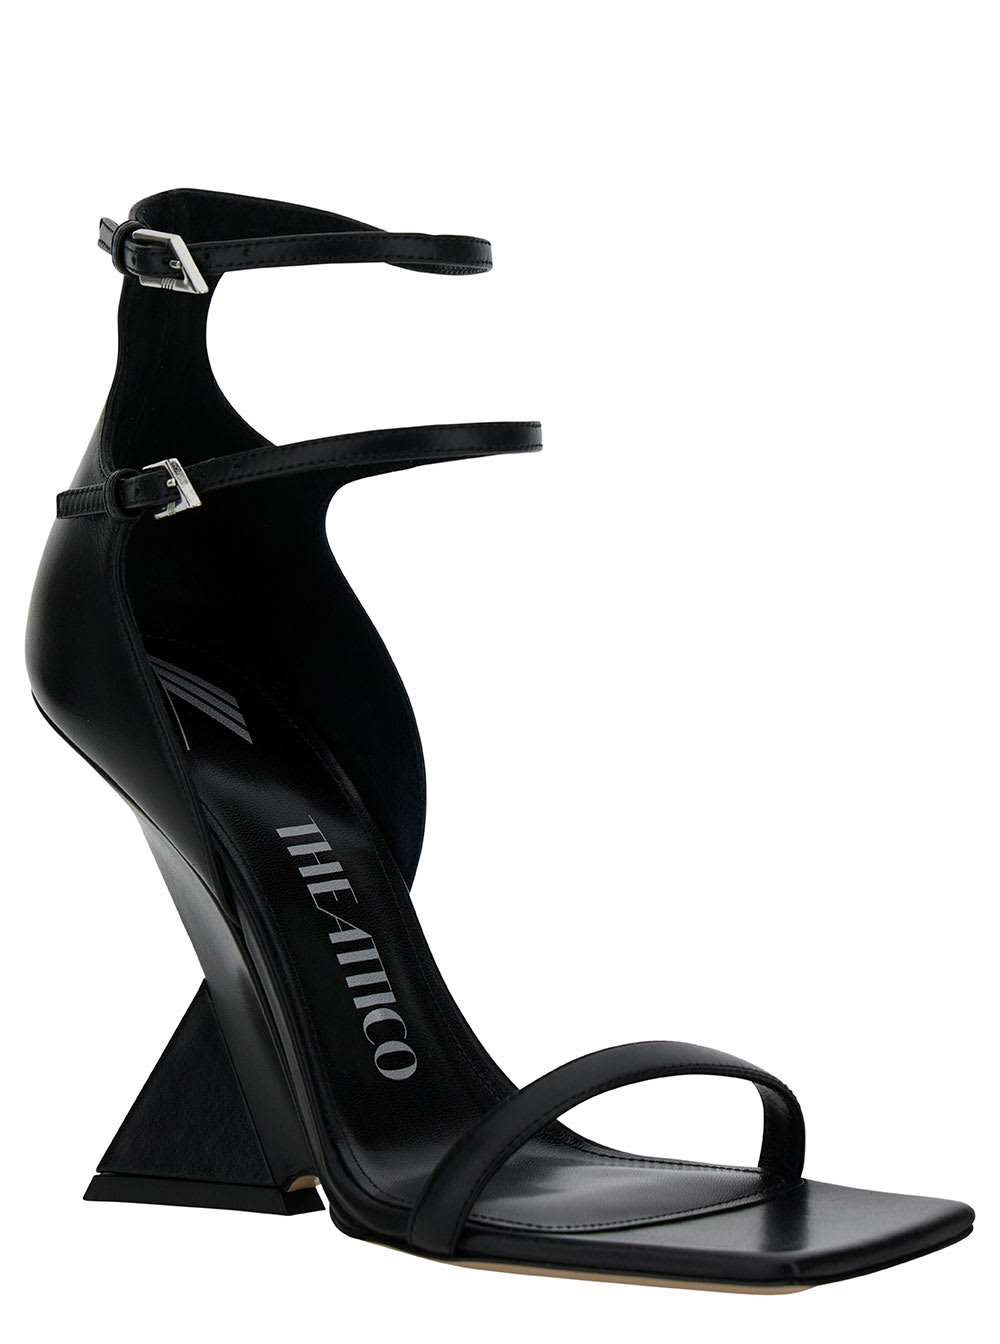 ATTICO GRACE BLACK SANDALS WITH DOUBLE ANKLE STRAP AND PYRAMID WEDGE IN LEATHER WOMAN